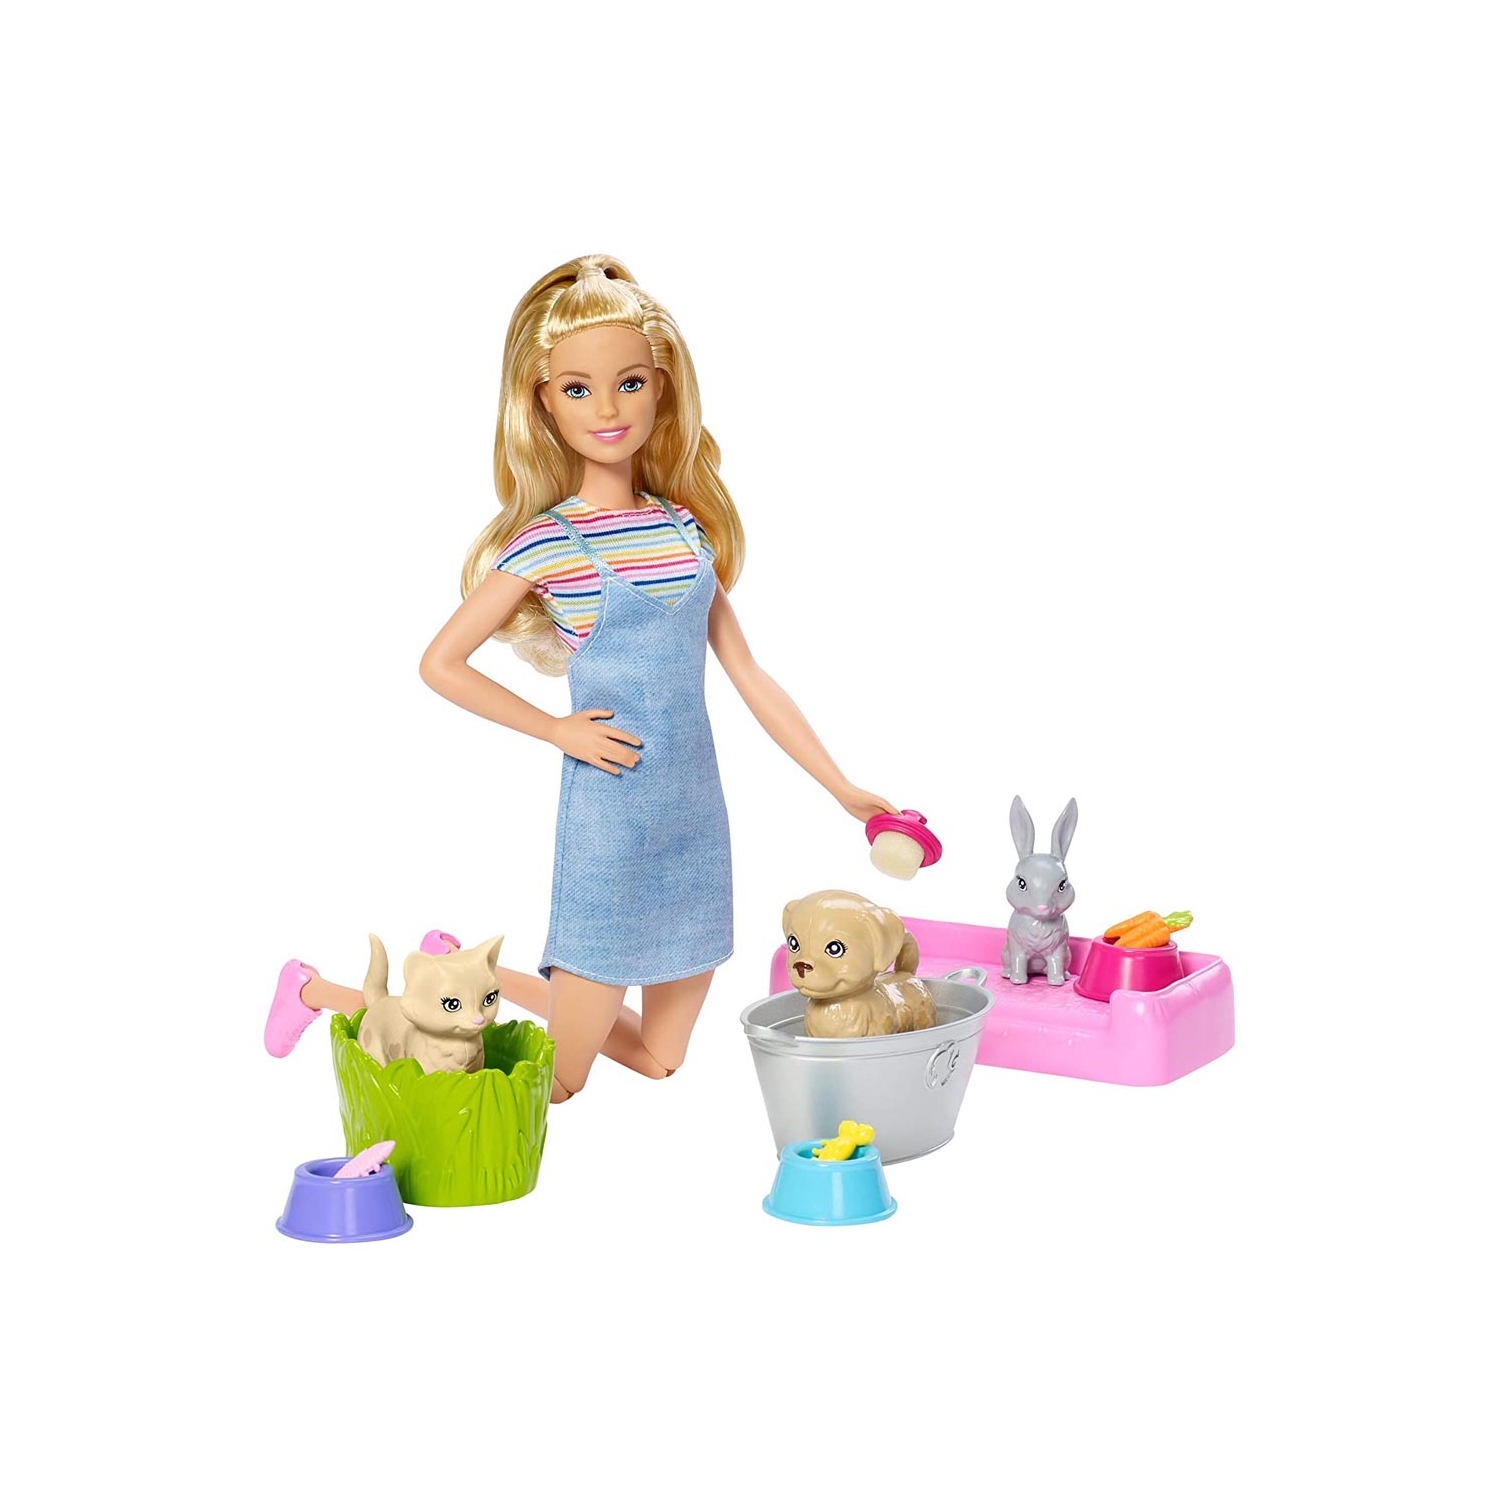 Barbie Play 'n Wash Pets Playset with Blonde Barbie Doll and 3